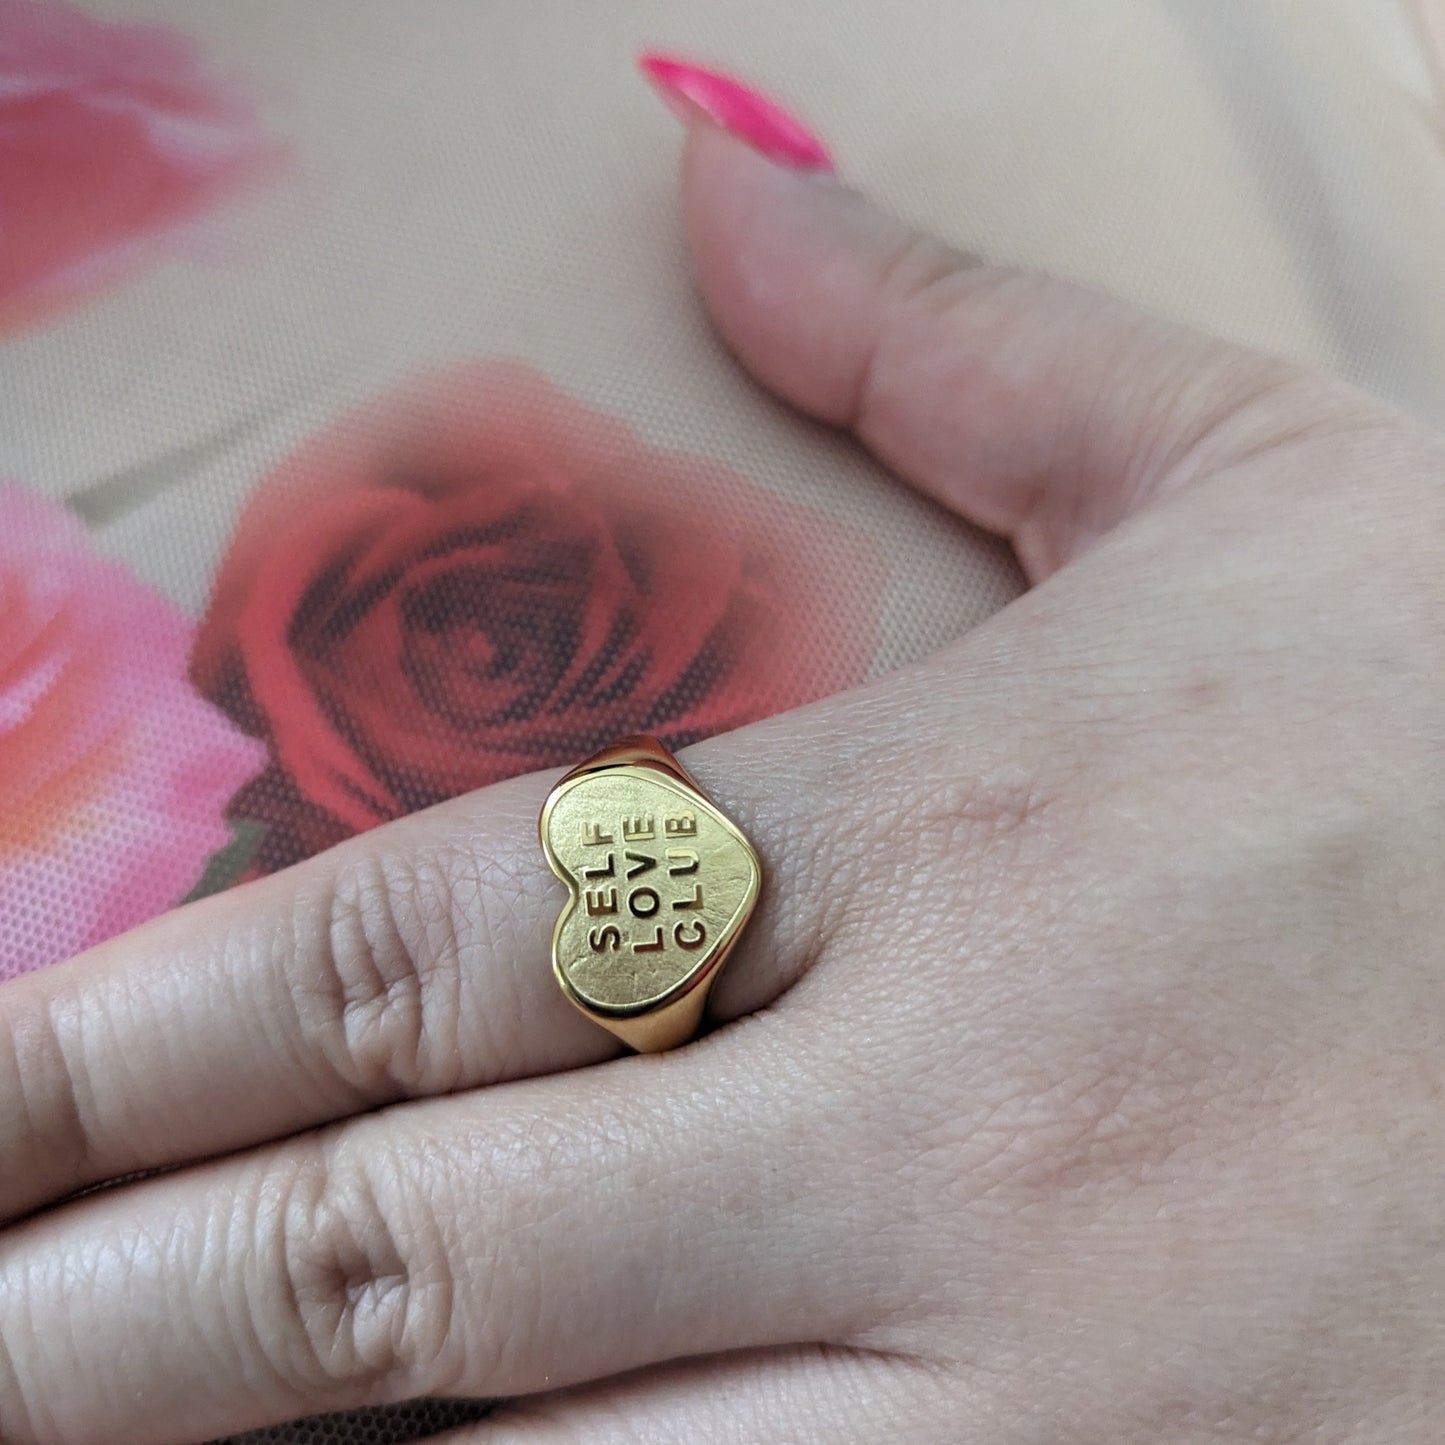 SELF LOVE CLUB  💗 Heart Shaped 18K Gold Plated Ring